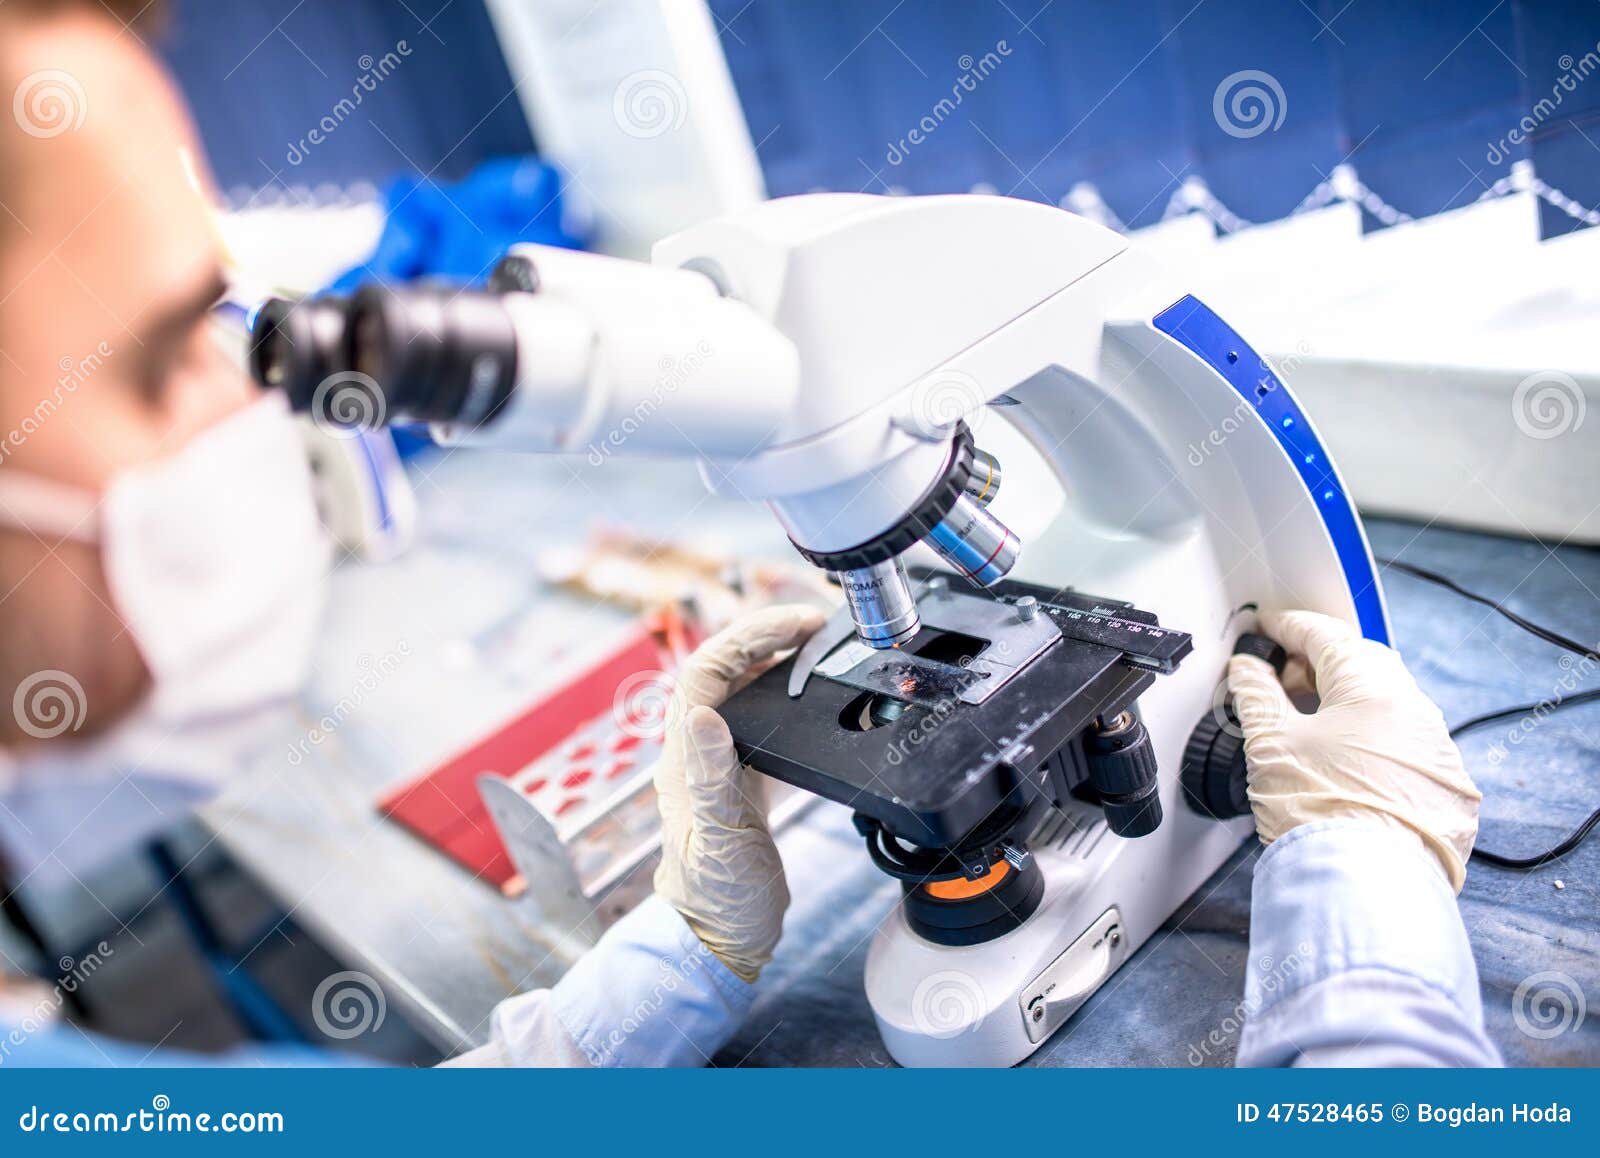 chemist researcher working with microscope for forensic evidence